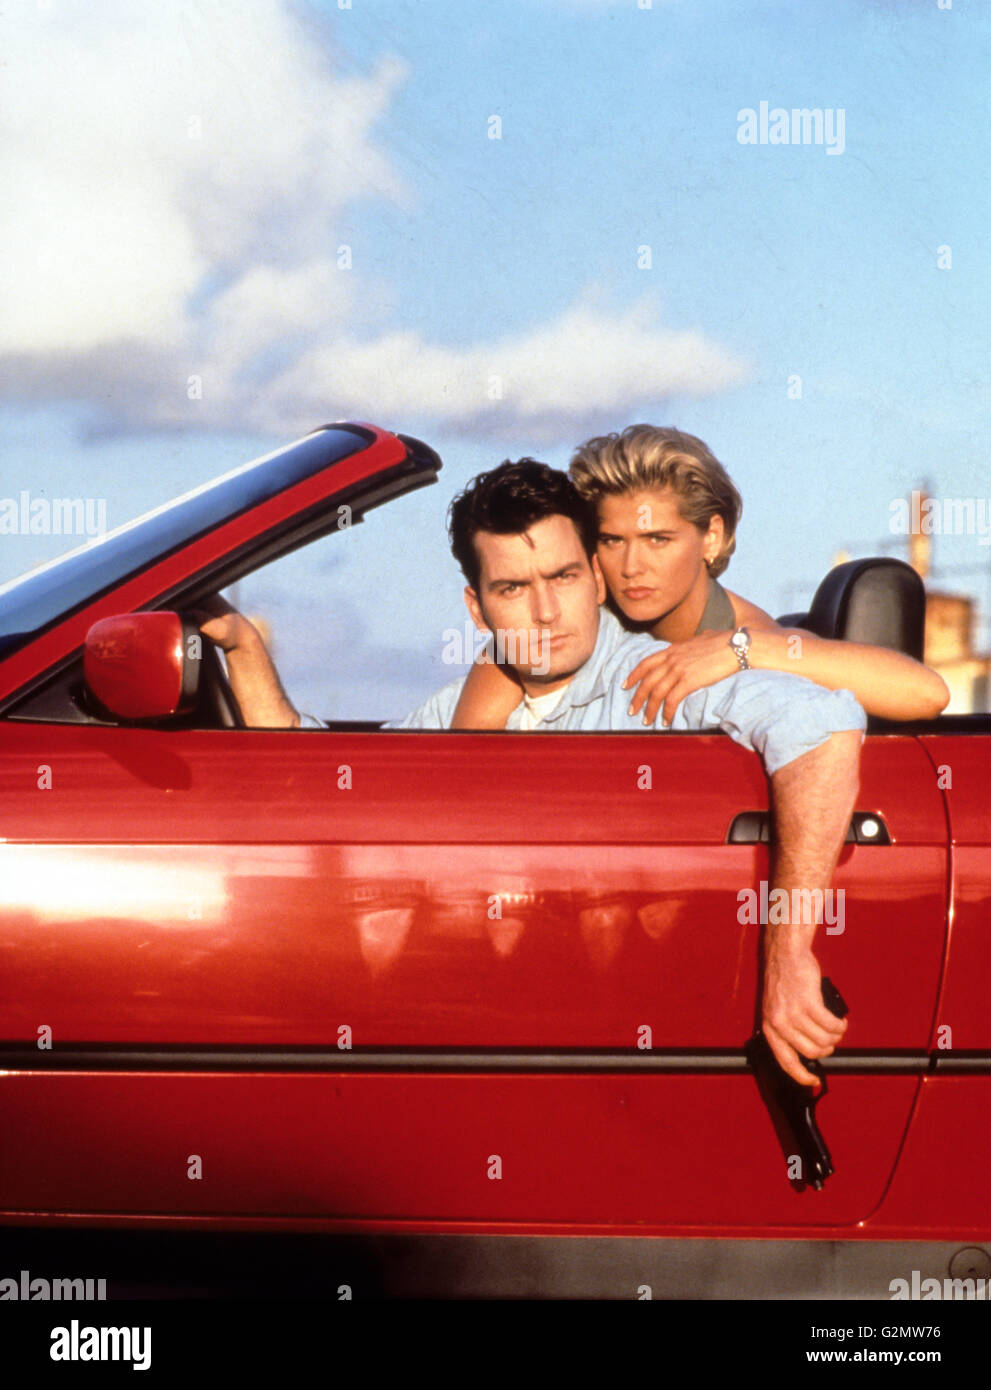 Charlie Sheen,Kristy Swanson,chase Foto Stock